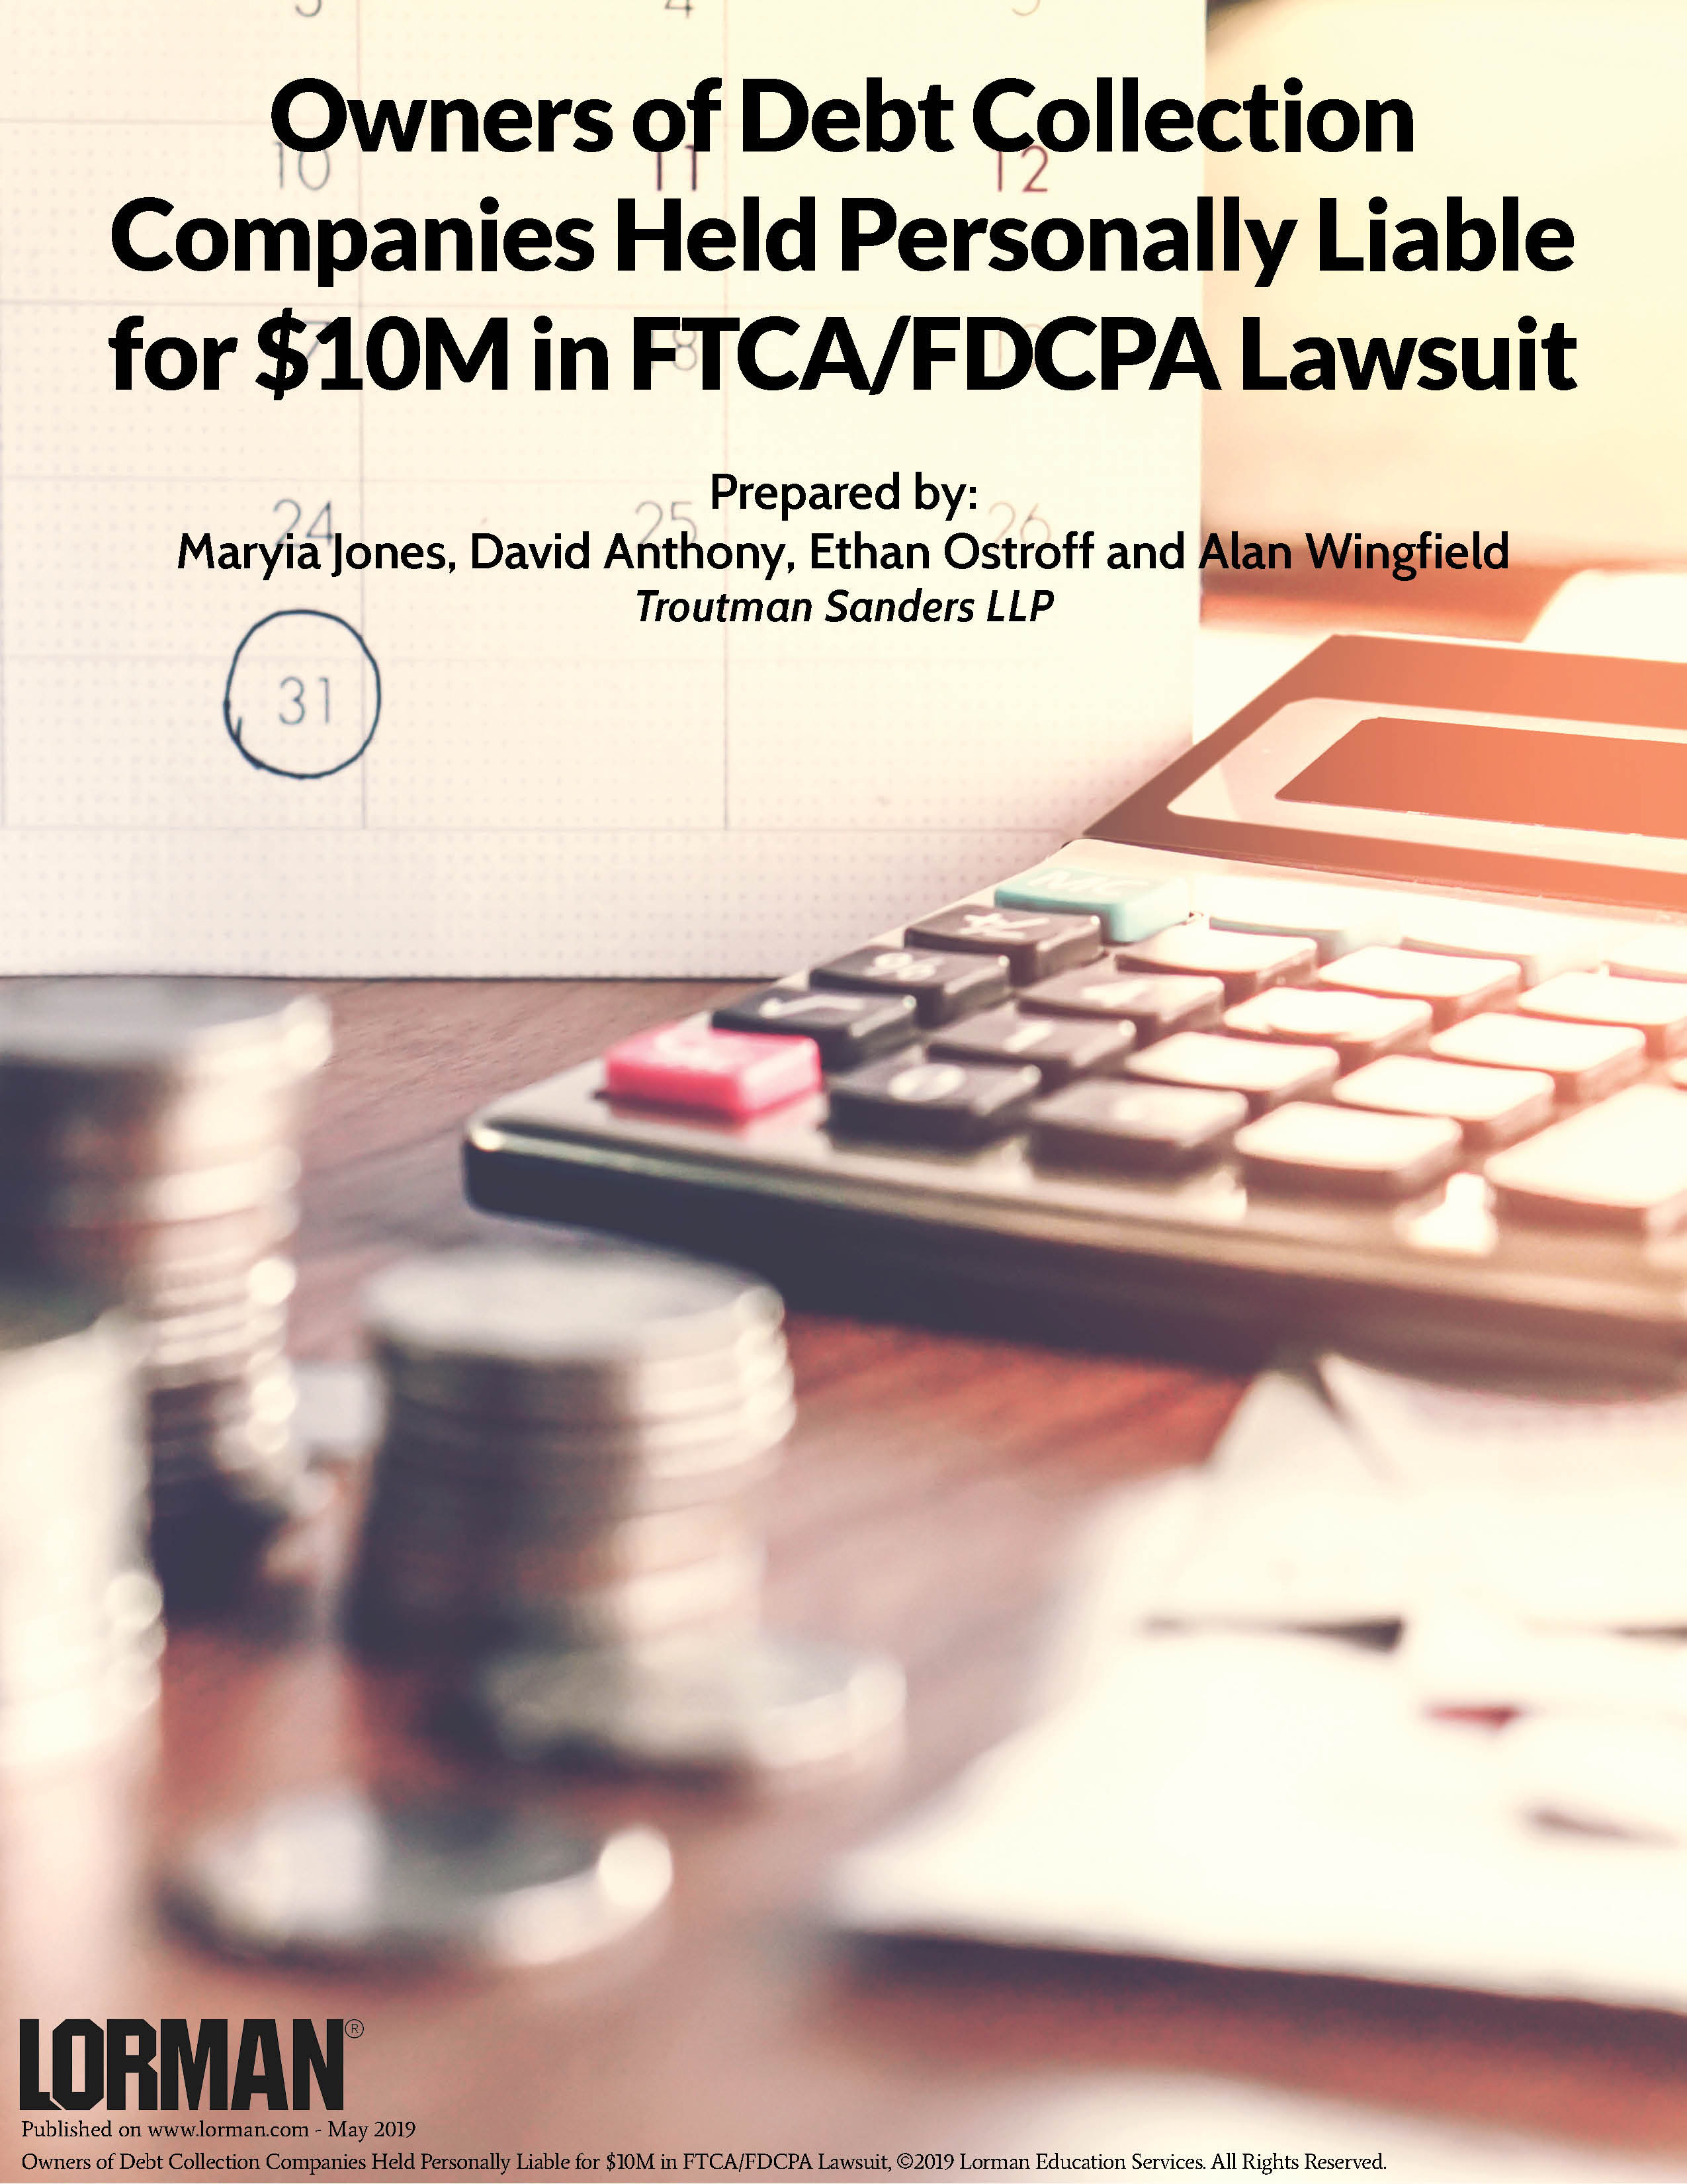 Owners of Debt Collection Companies Held Personally Liable for $10M in FTCA/FDCPA Lawsuit